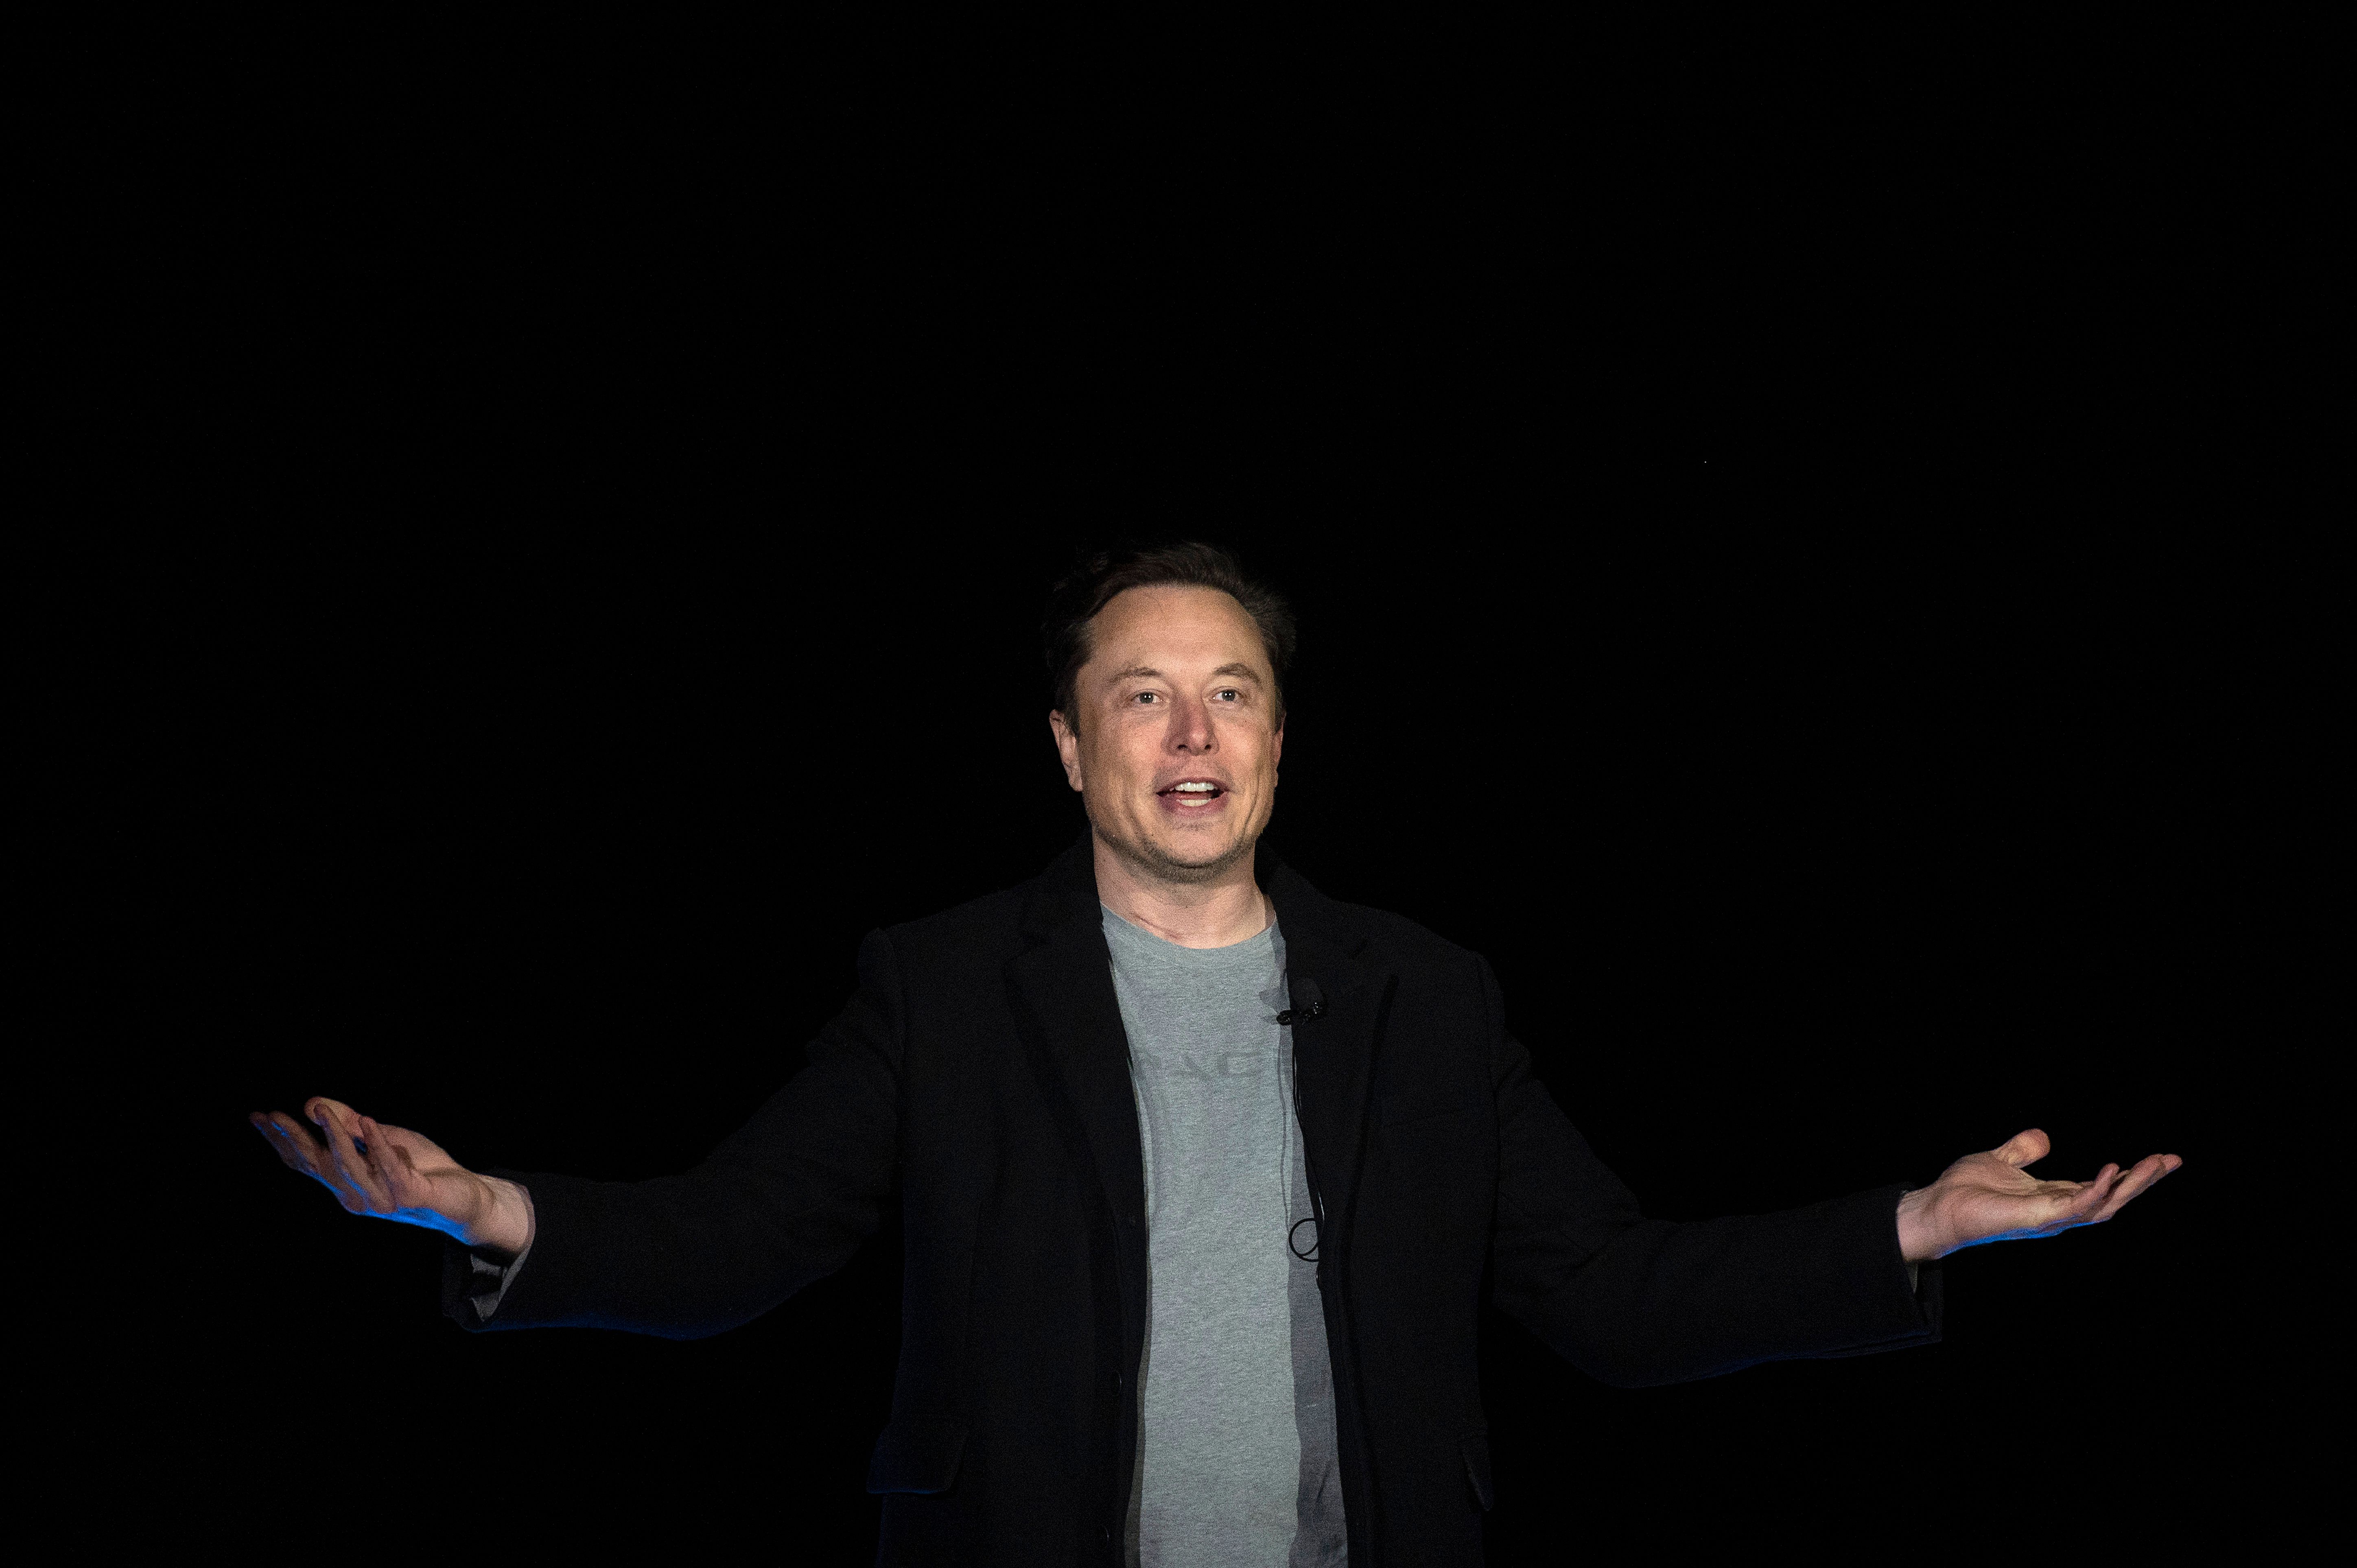 Elon Musk standing against a dark background with his hands out in a “who me?” gesture.